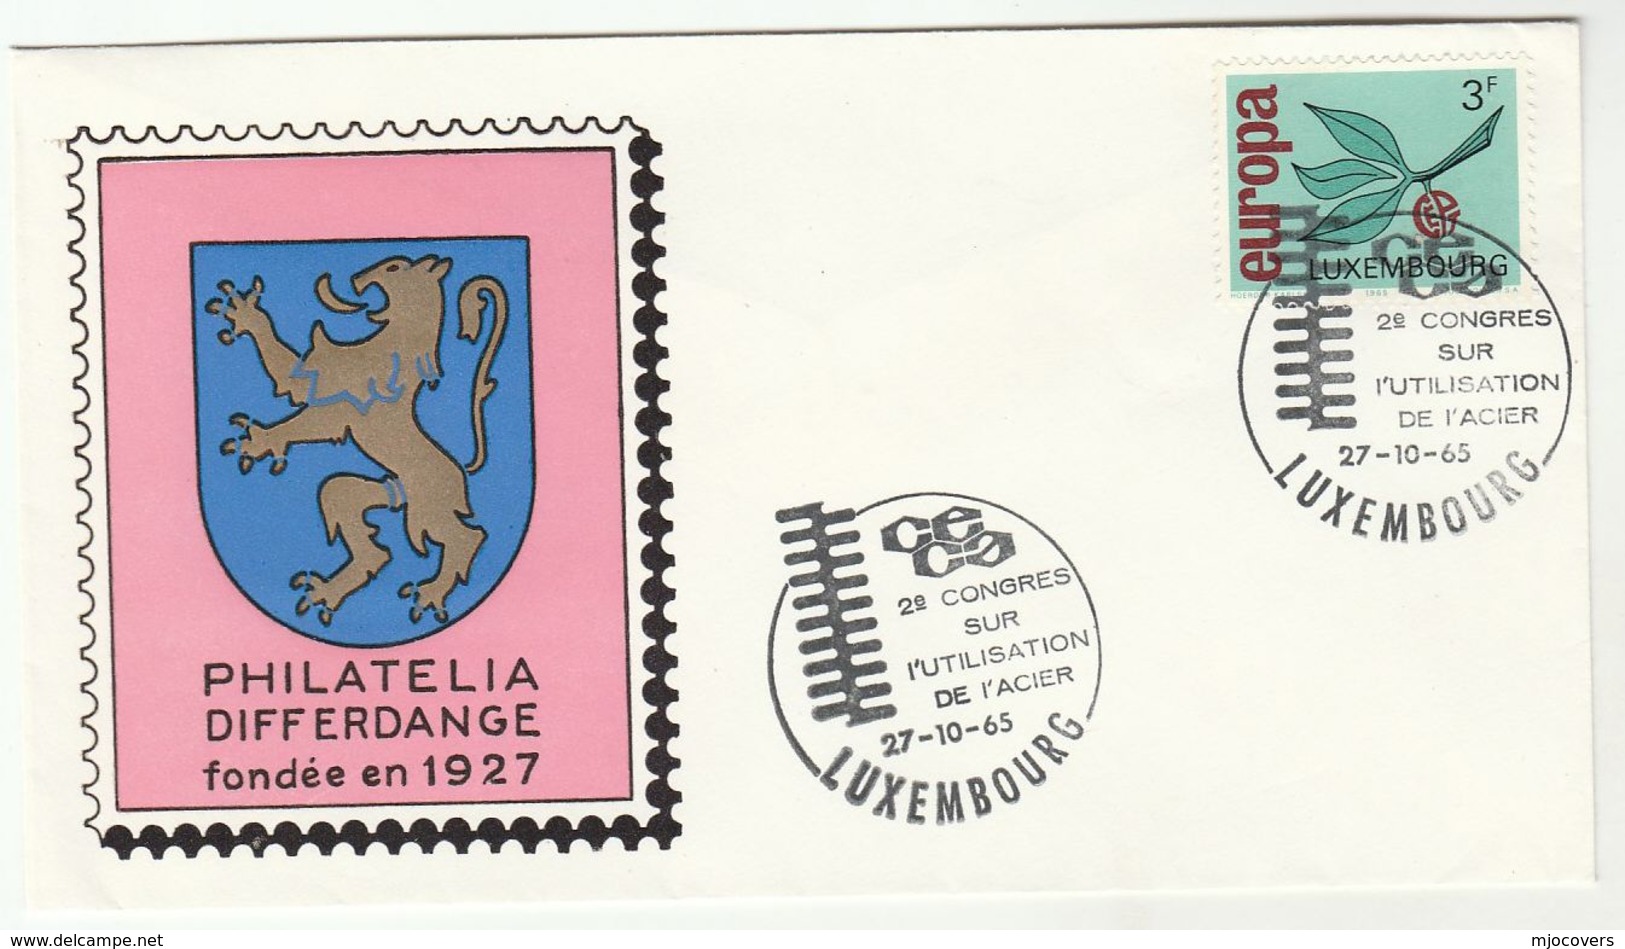 1965 CECA Uses Of STEEL CONGRESS EVENT COVER LUXEMBOURG Stamps EUROPA European Community Industry Metal - Covers & Documents